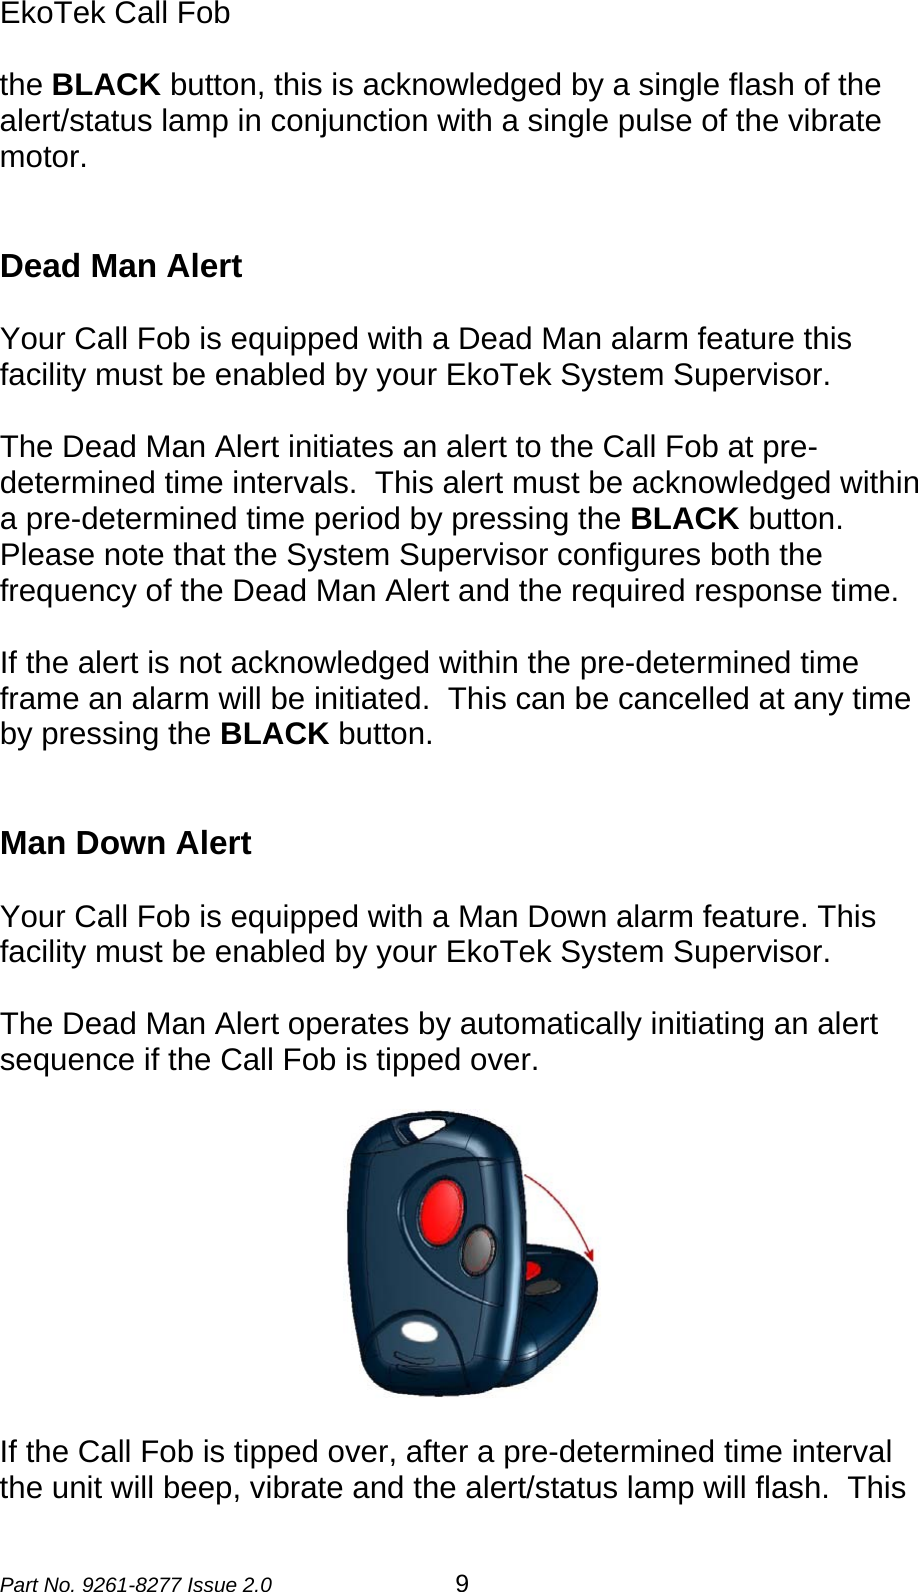 EkoTek Call Fob  the BLACK button, this is acknowledged by a single flash of the alert/status lamp in conjunction with a single pulse of the vibrate motor.   Dead Man Alert  Your Call Fob is equipped with a Dead Man alarm feature this facility must be enabled by your EkoTek System Supervisor.  The Dead Man Alert initiates an alert to the Call Fob at pre-determined time intervals.  This alert must be acknowledged within a pre-determined time period by pressing the BLACK button.  Please note that the System Supervisor configures both the frequency of the Dead Man Alert and the required response time.    If the alert is not acknowledged within the pre-determined time frame an alarm will be initiated.  This can be cancelled at any time by pressing the BLACK button.    Man Down Alert  Your Call Fob is equipped with a Man Down alarm feature. This facility must be enabled by your EkoTek System Supervisor.  The Dead Man Alert operates by automatically initiating an alert sequence if the Call Fob is tipped over.  If the Call Fob is tipped over, after a pre-determined time interval the unit will beep, vibrate and the alert/status lamp will flash.  This Part No. 9261-8277 Issue 2.0  9 